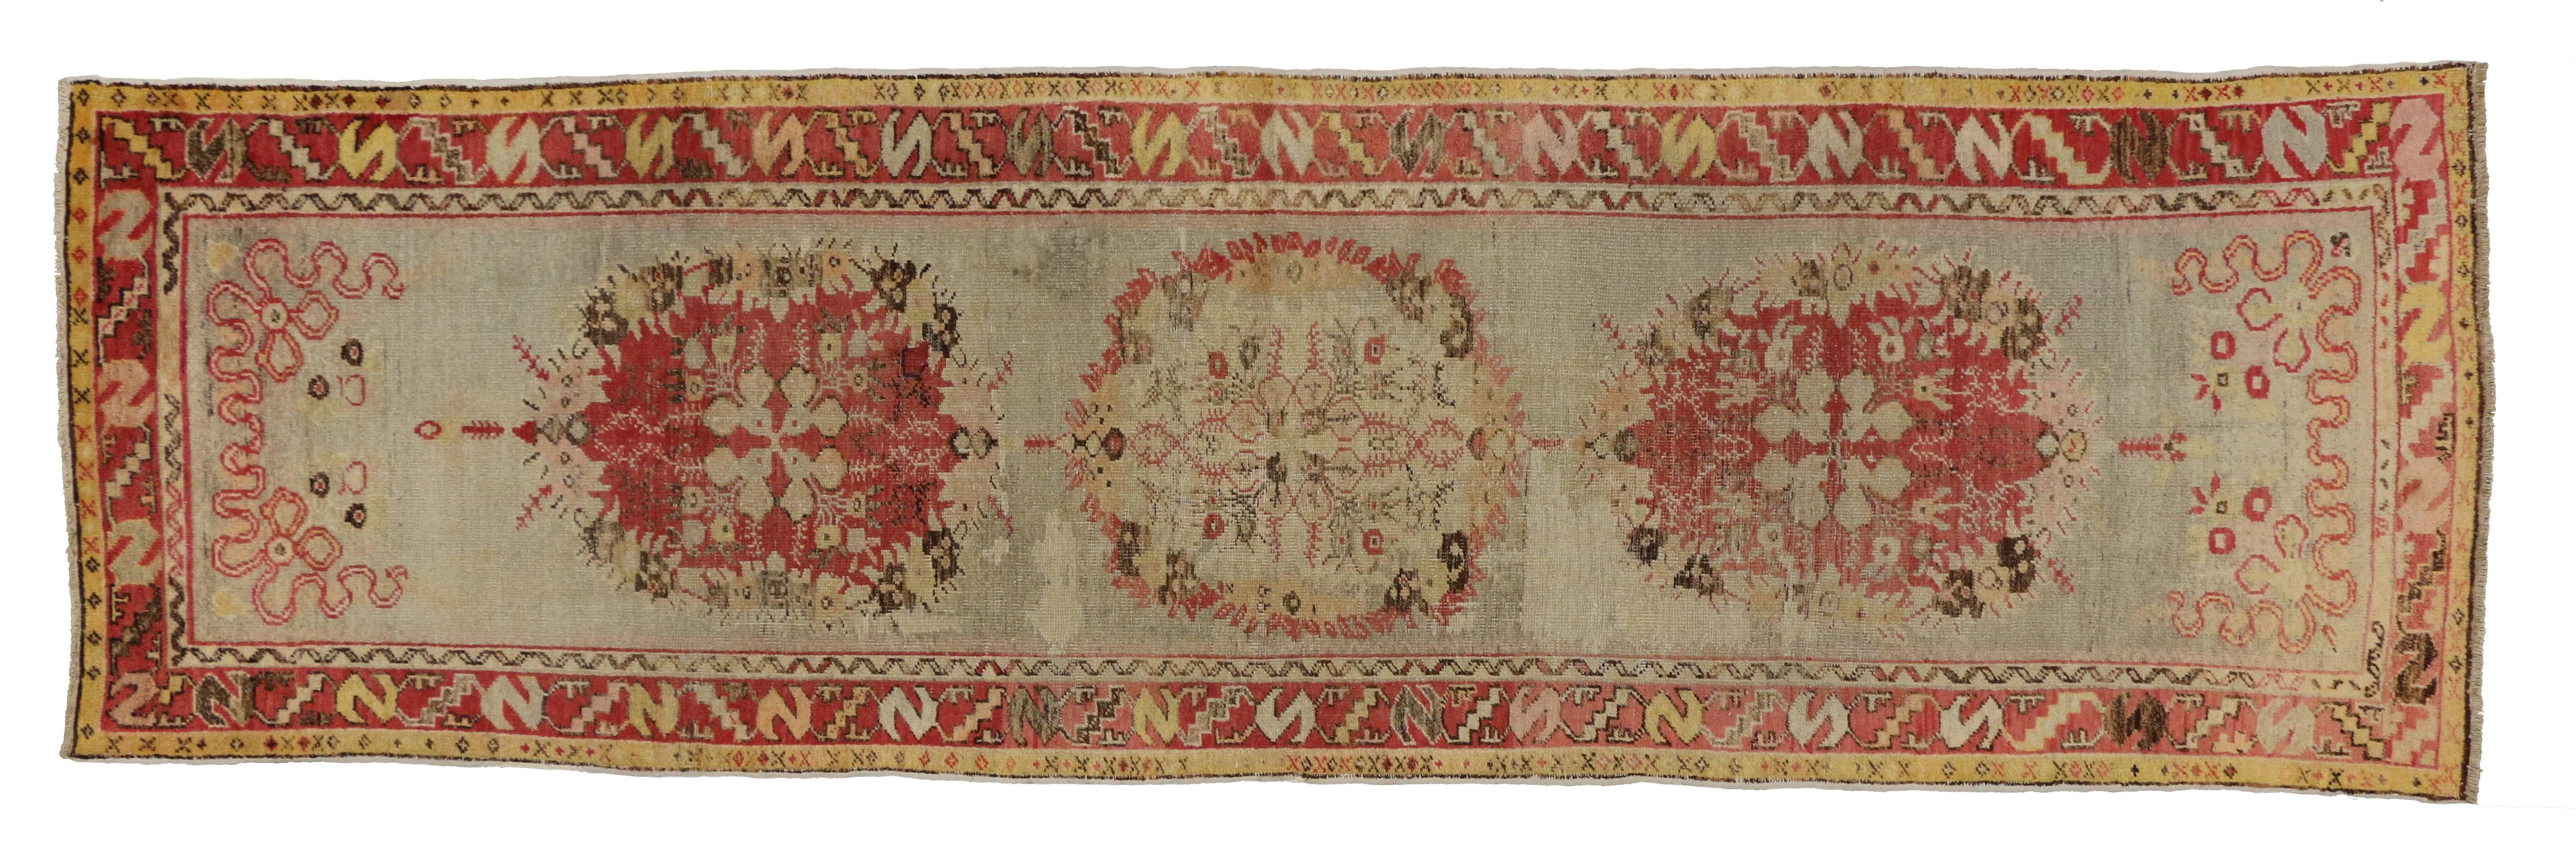 Distressed Vintage Turkish Oushak Runner with Romantic French Country Style For Sale 4